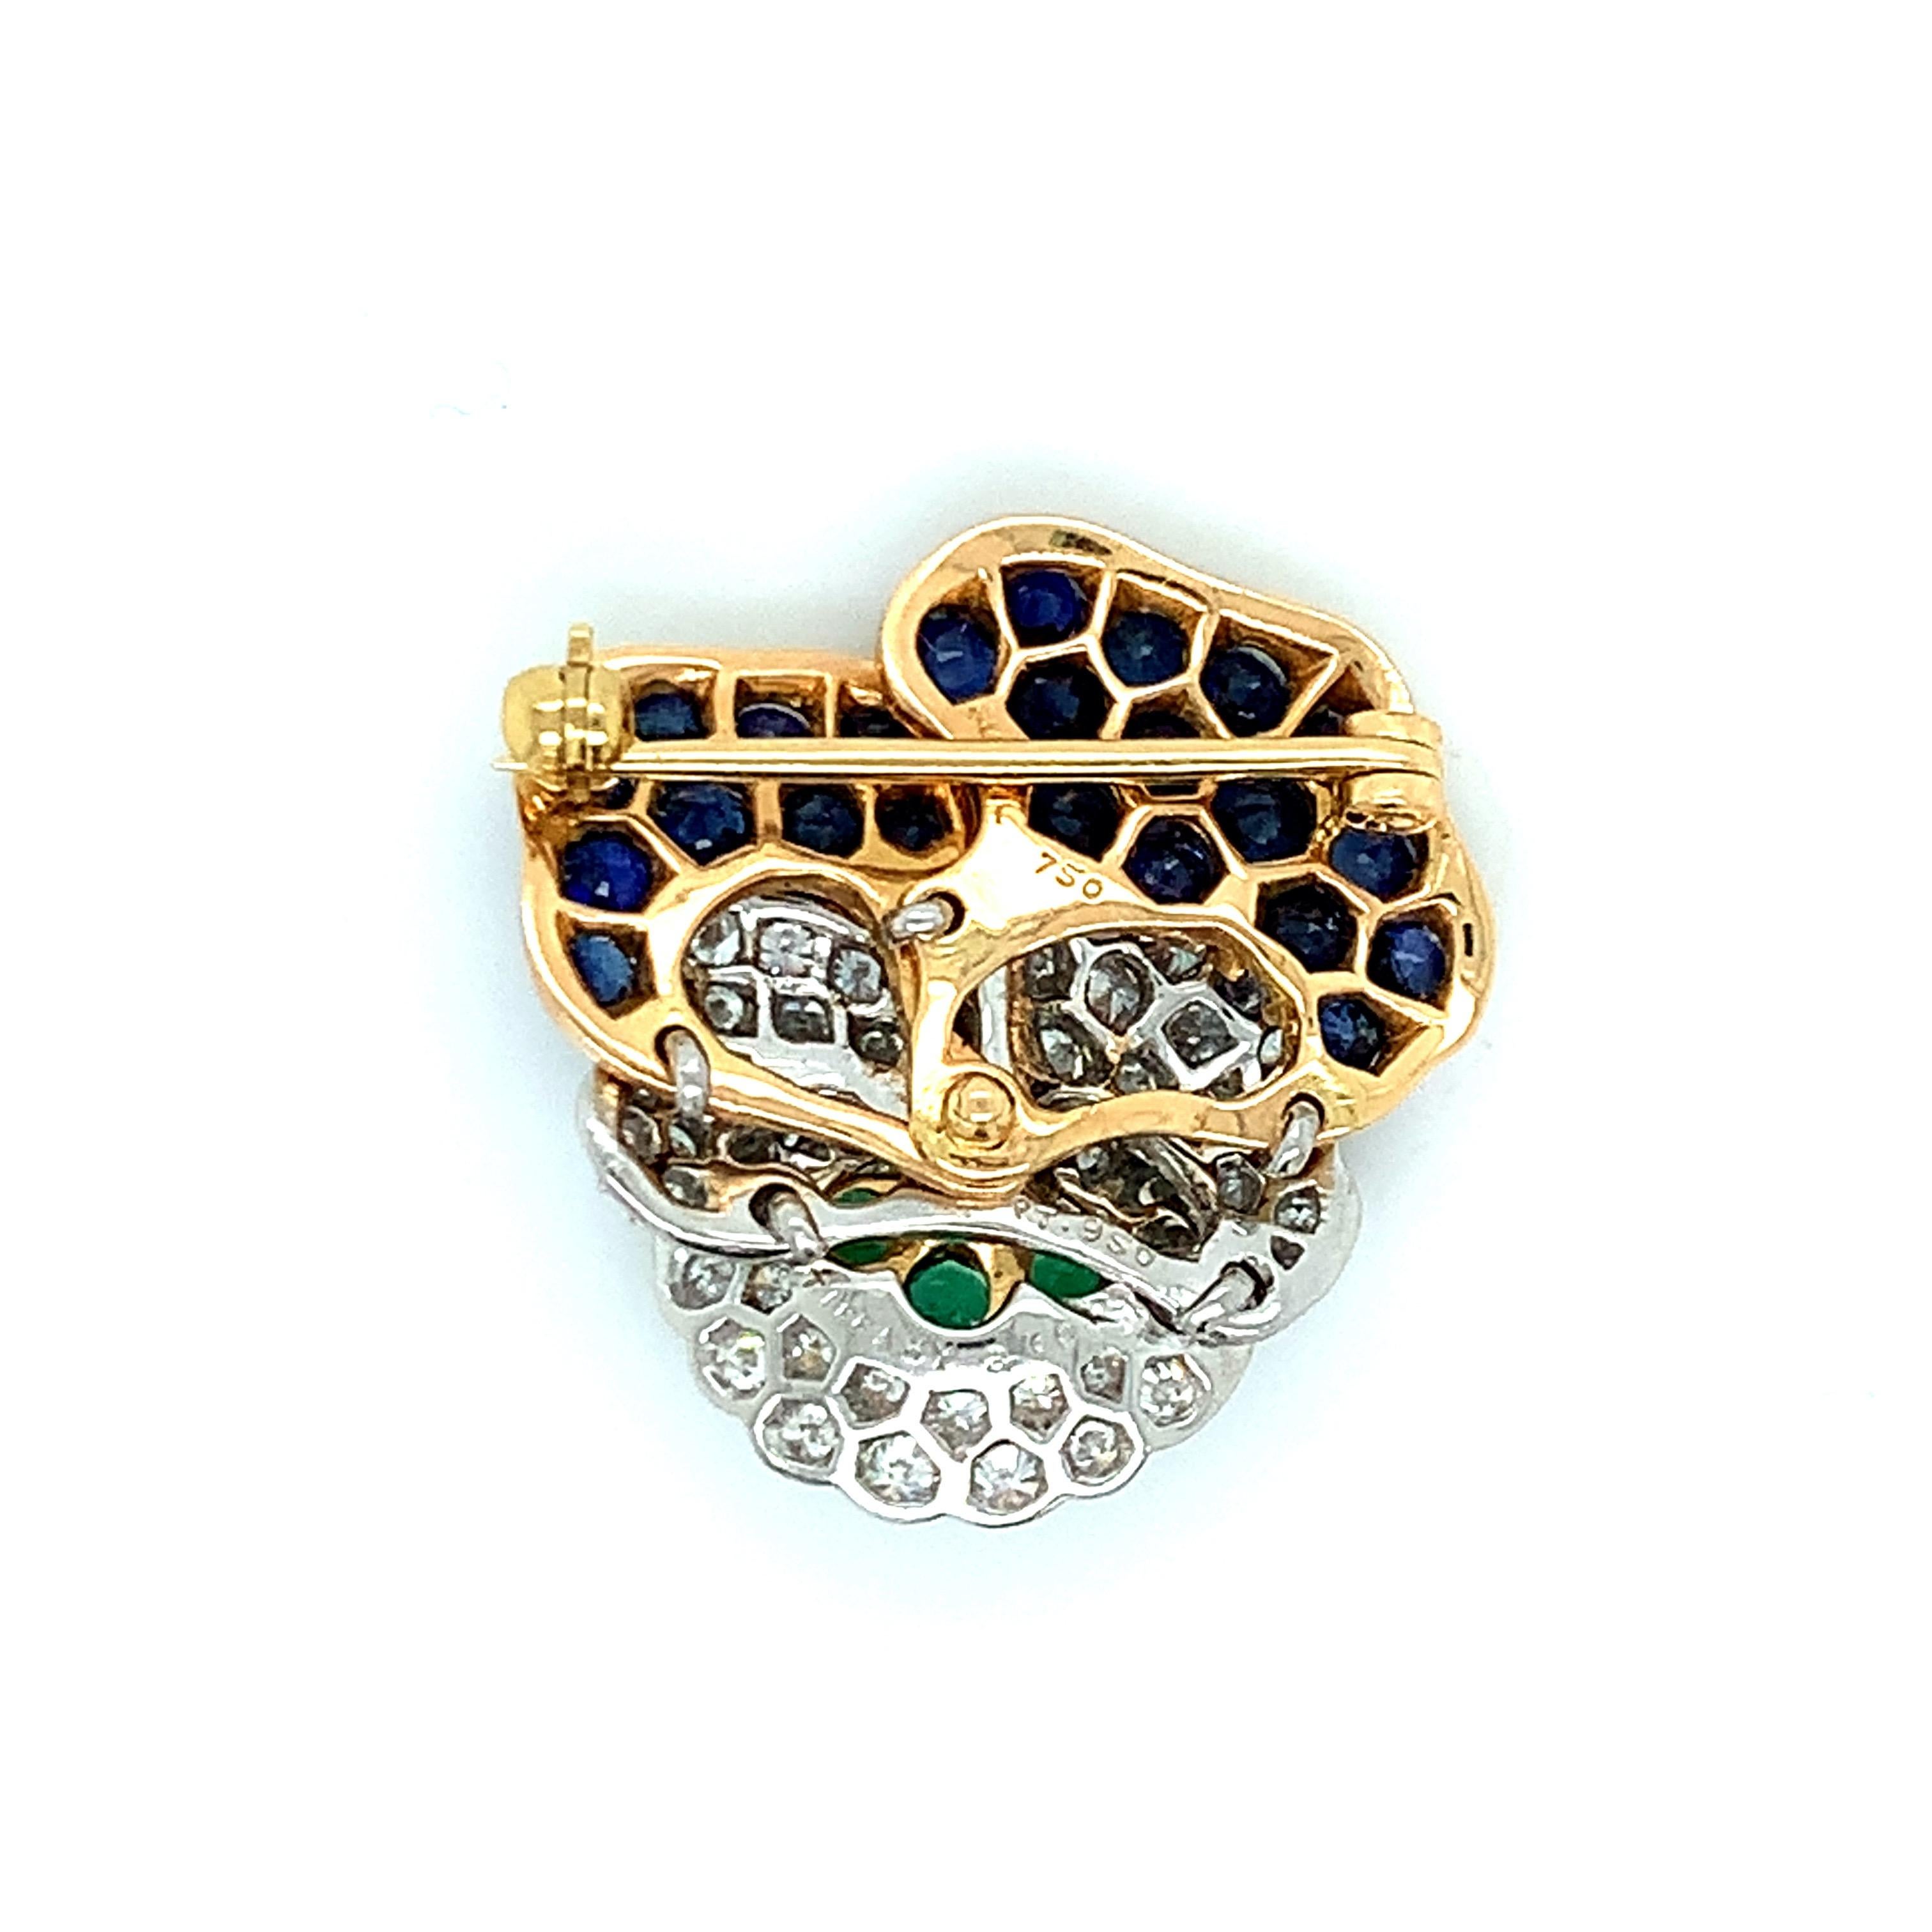 Iconic pansy flower brooch by Tiffany & Co, set in 18k gold and platinum, featuring emeralds, blue sapphires and approx. 1.00ctw G/VS diamonds. The brooch measures 1